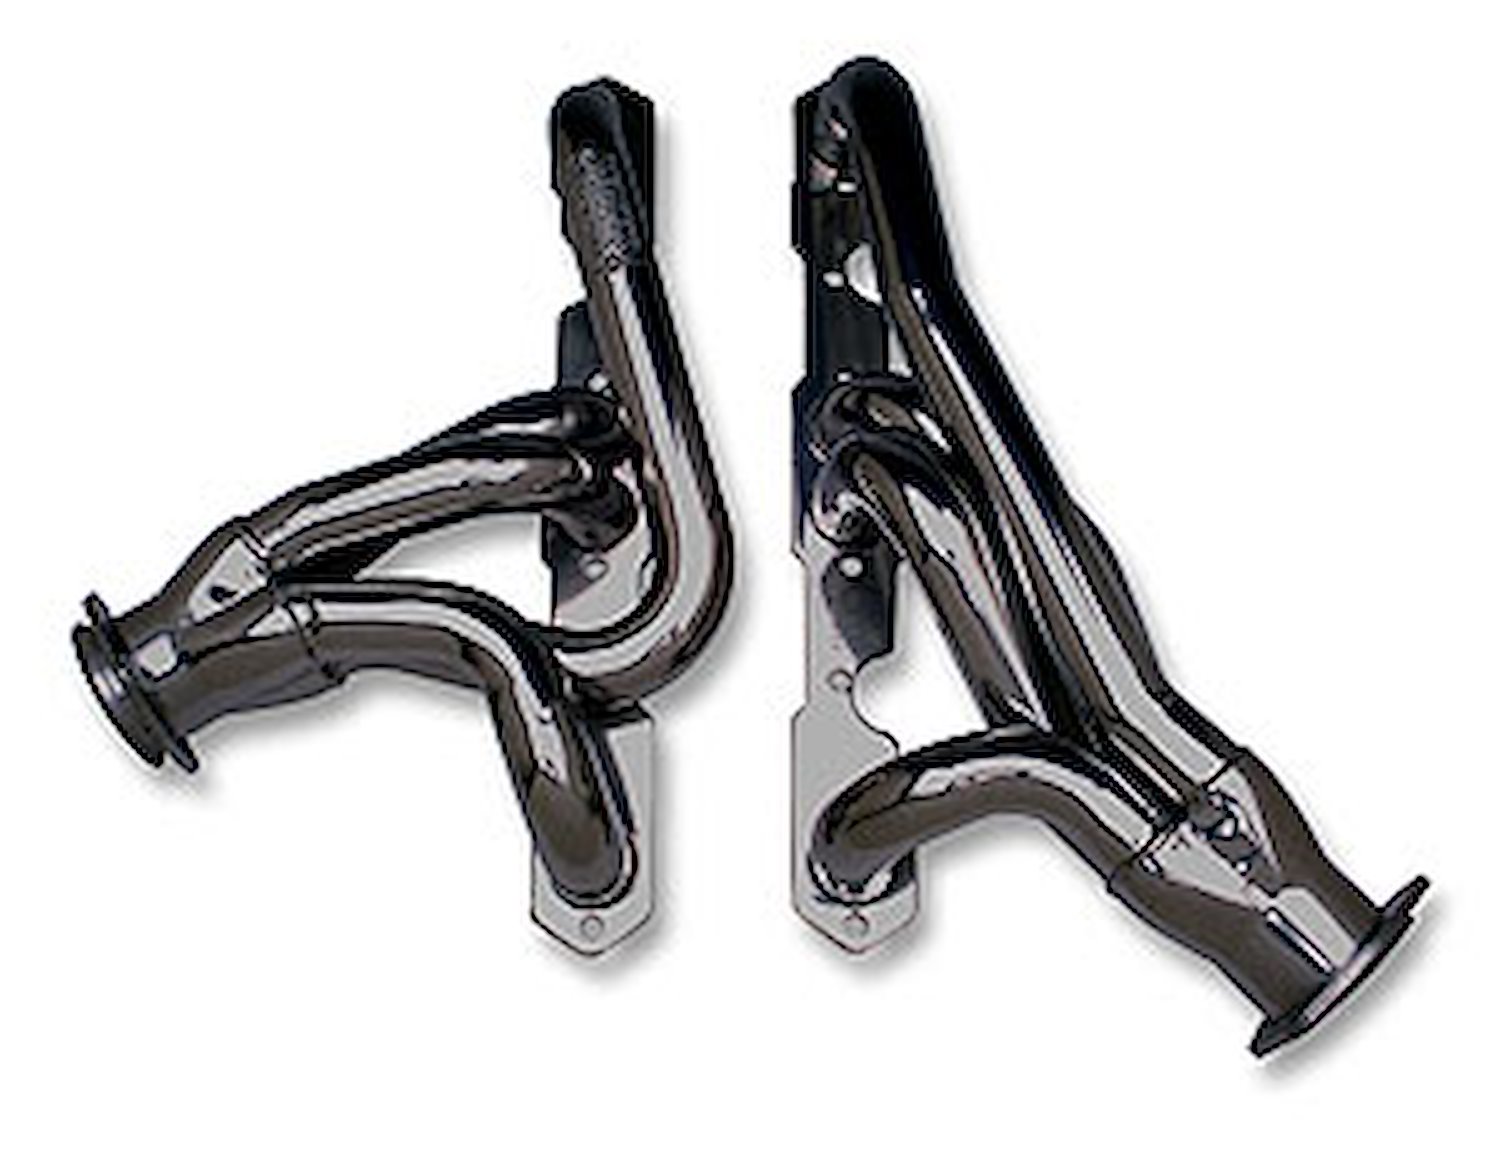 Standard Duty Uncoated Shorty Headers for 1972-83 Jeep CJ5